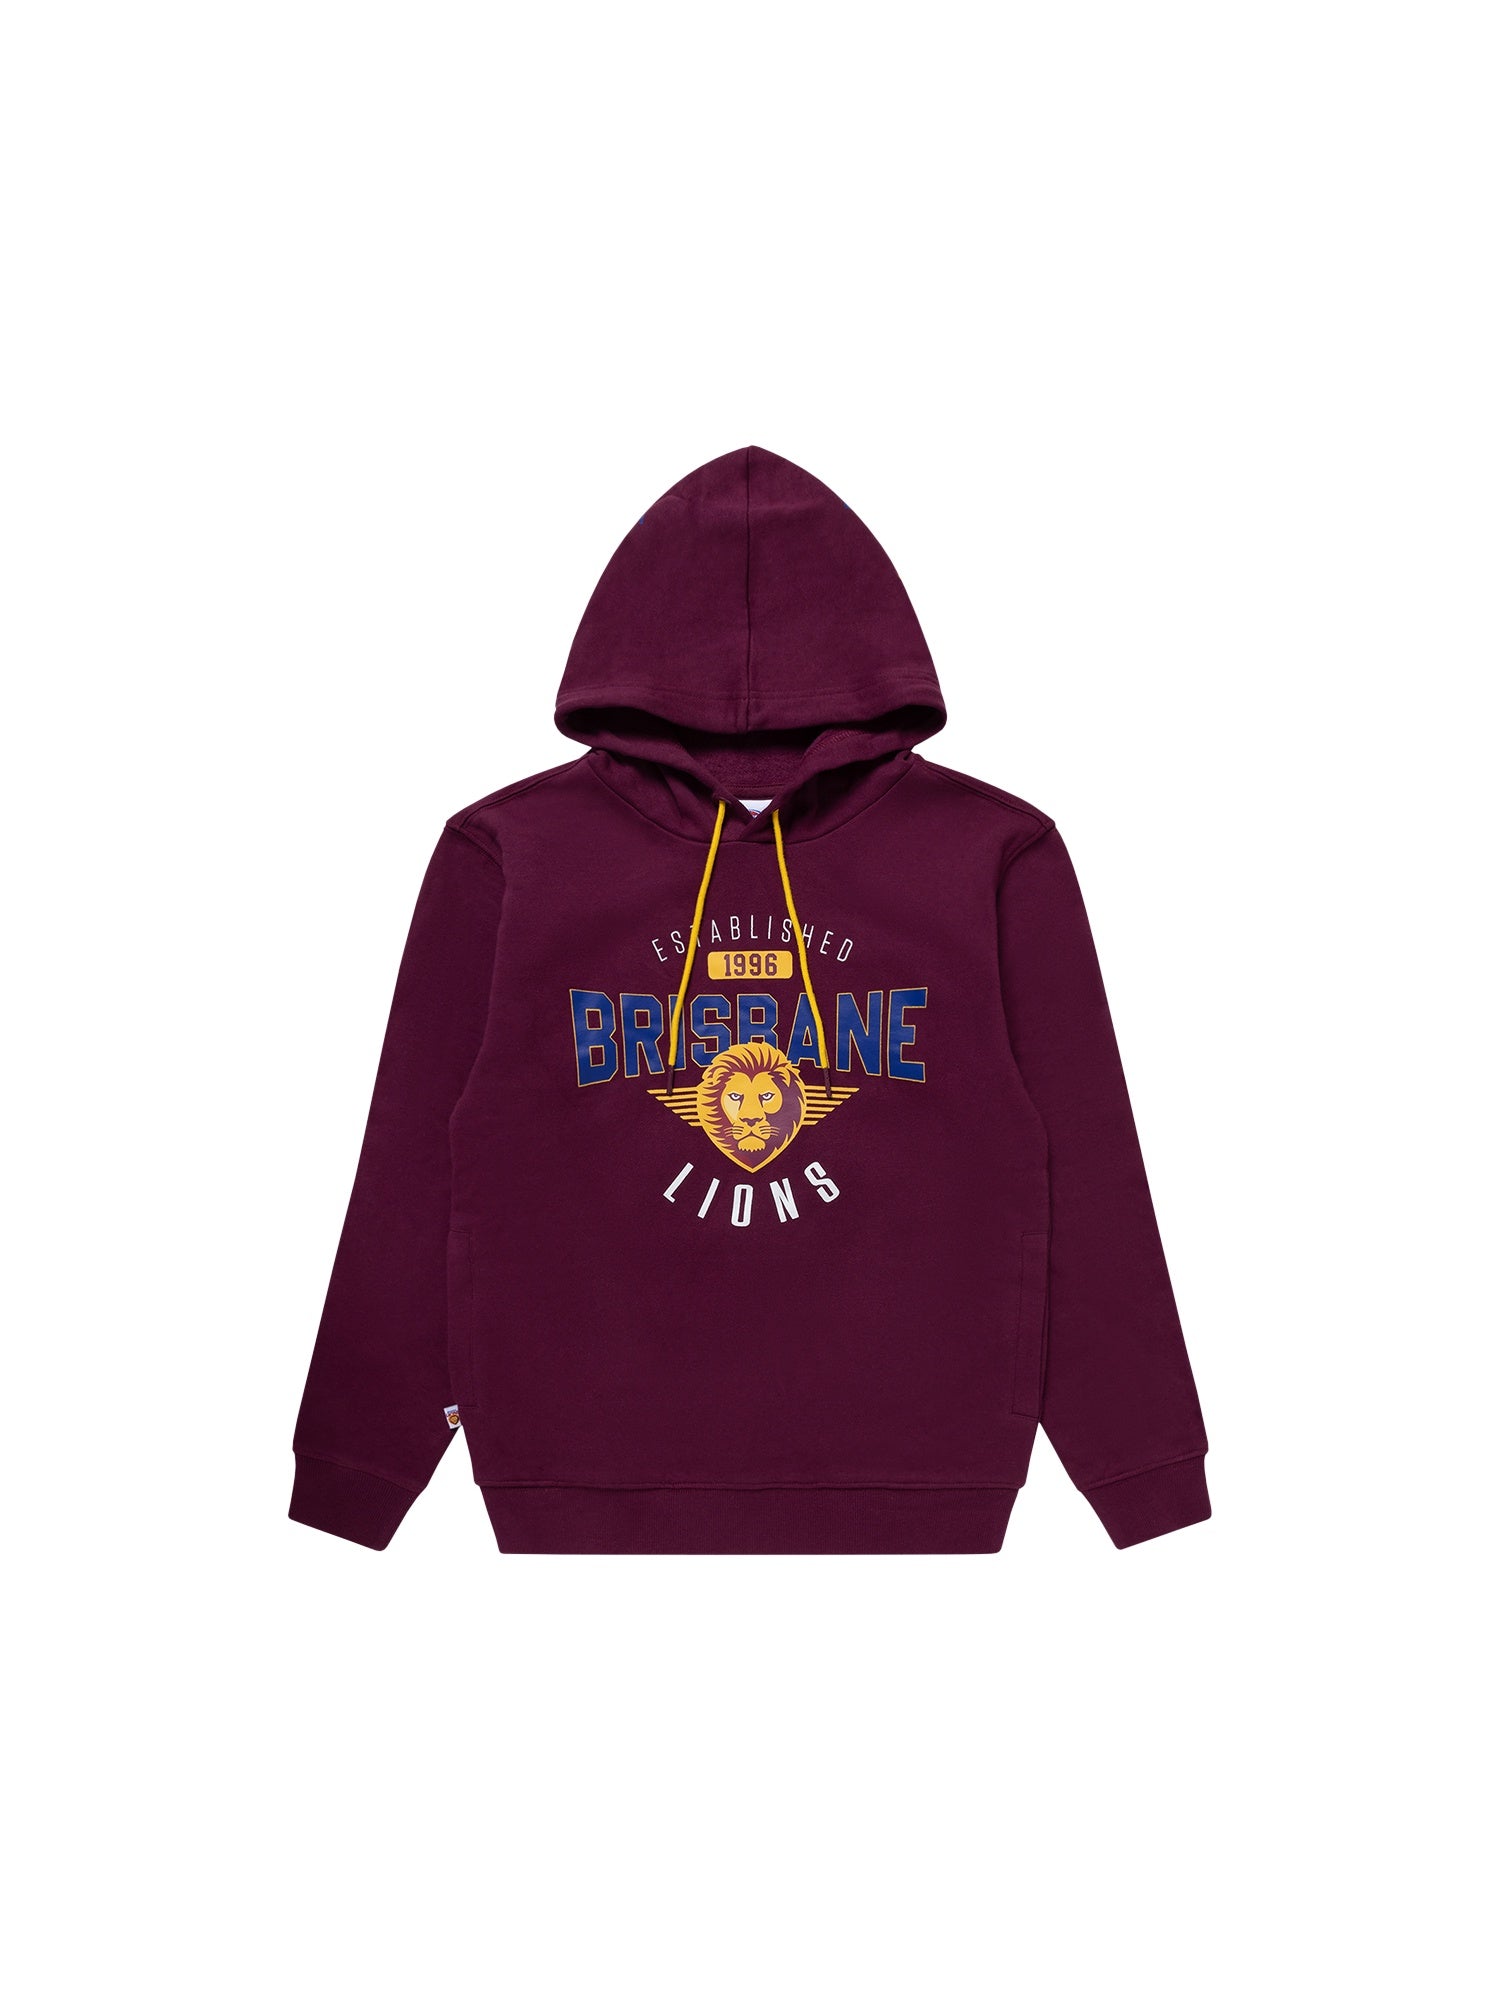 Brisbane Lions Youth Supporter Hood